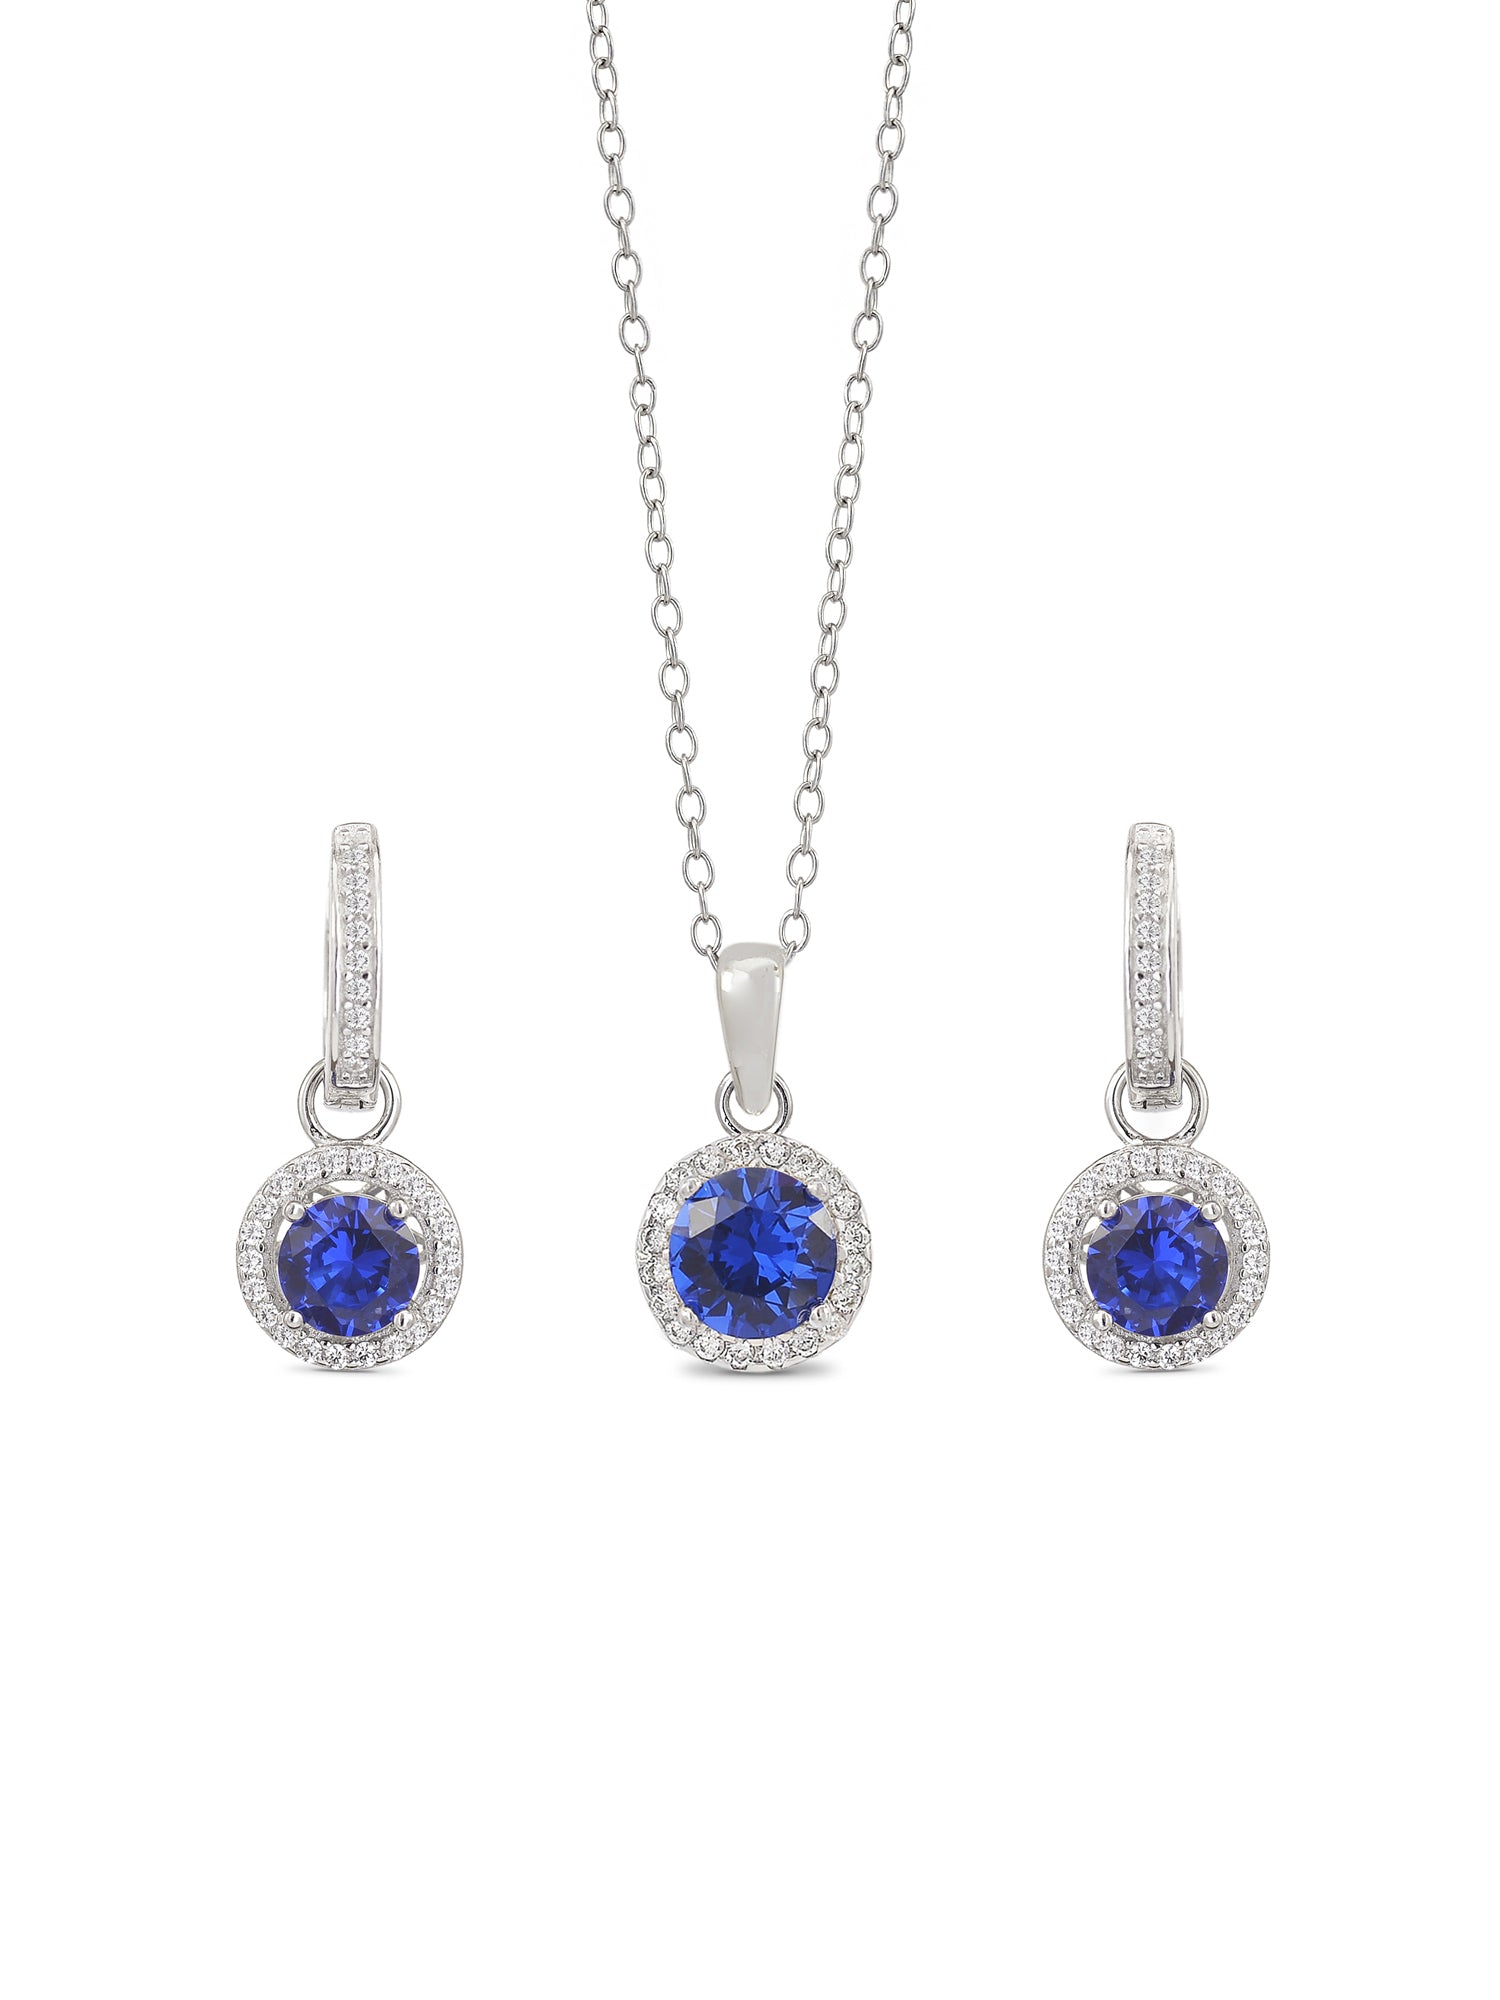 BLUE SAPPHIRE HALO NECKLACE SET WITH EARRINGS FOR WOMEN